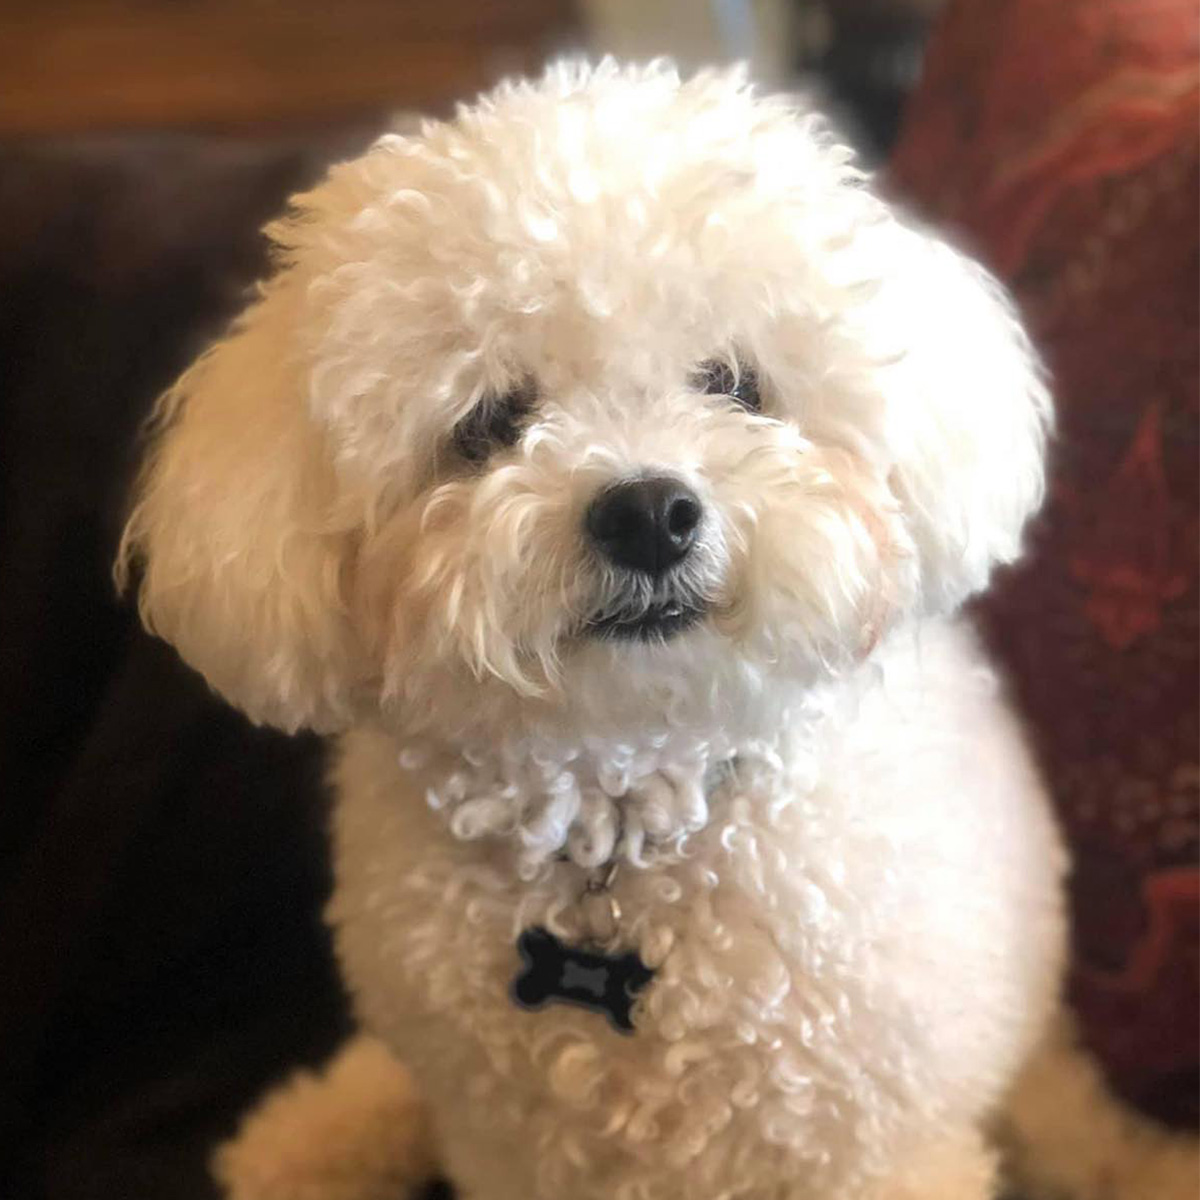 Meet karen g From san antonio texas and her almost five year old bichon frise tucker Her family has a long standing tradition of loving bichons in fact her father the colonel brought in the first of their bichons